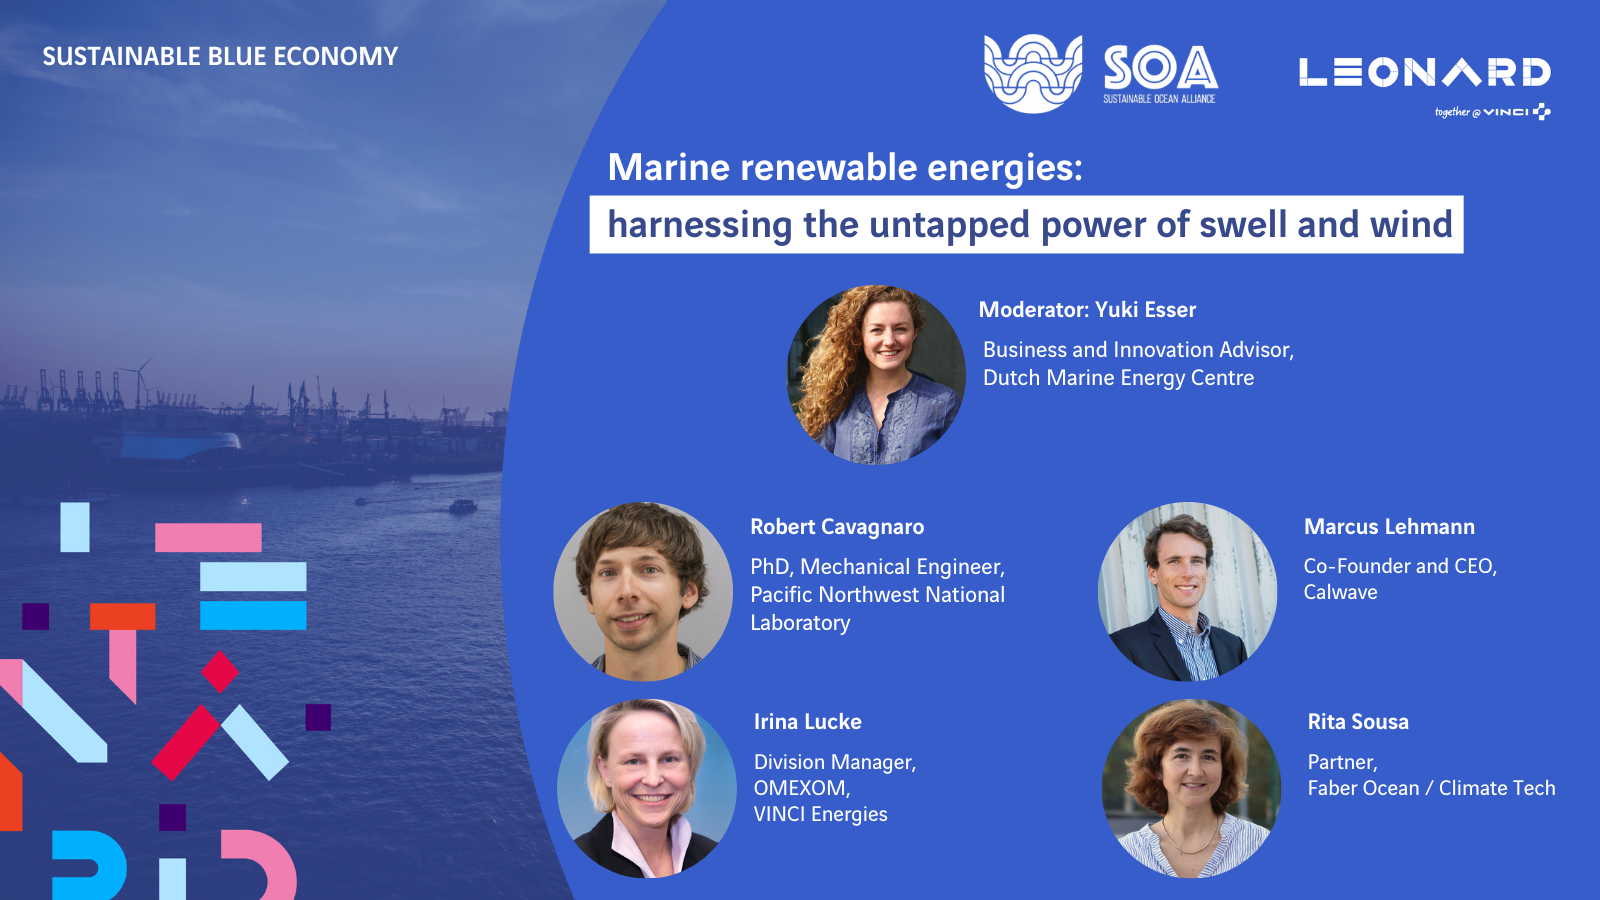 Report – Marine renewable energies: harnessing the untapped power of swell and wind (12 May 2022)